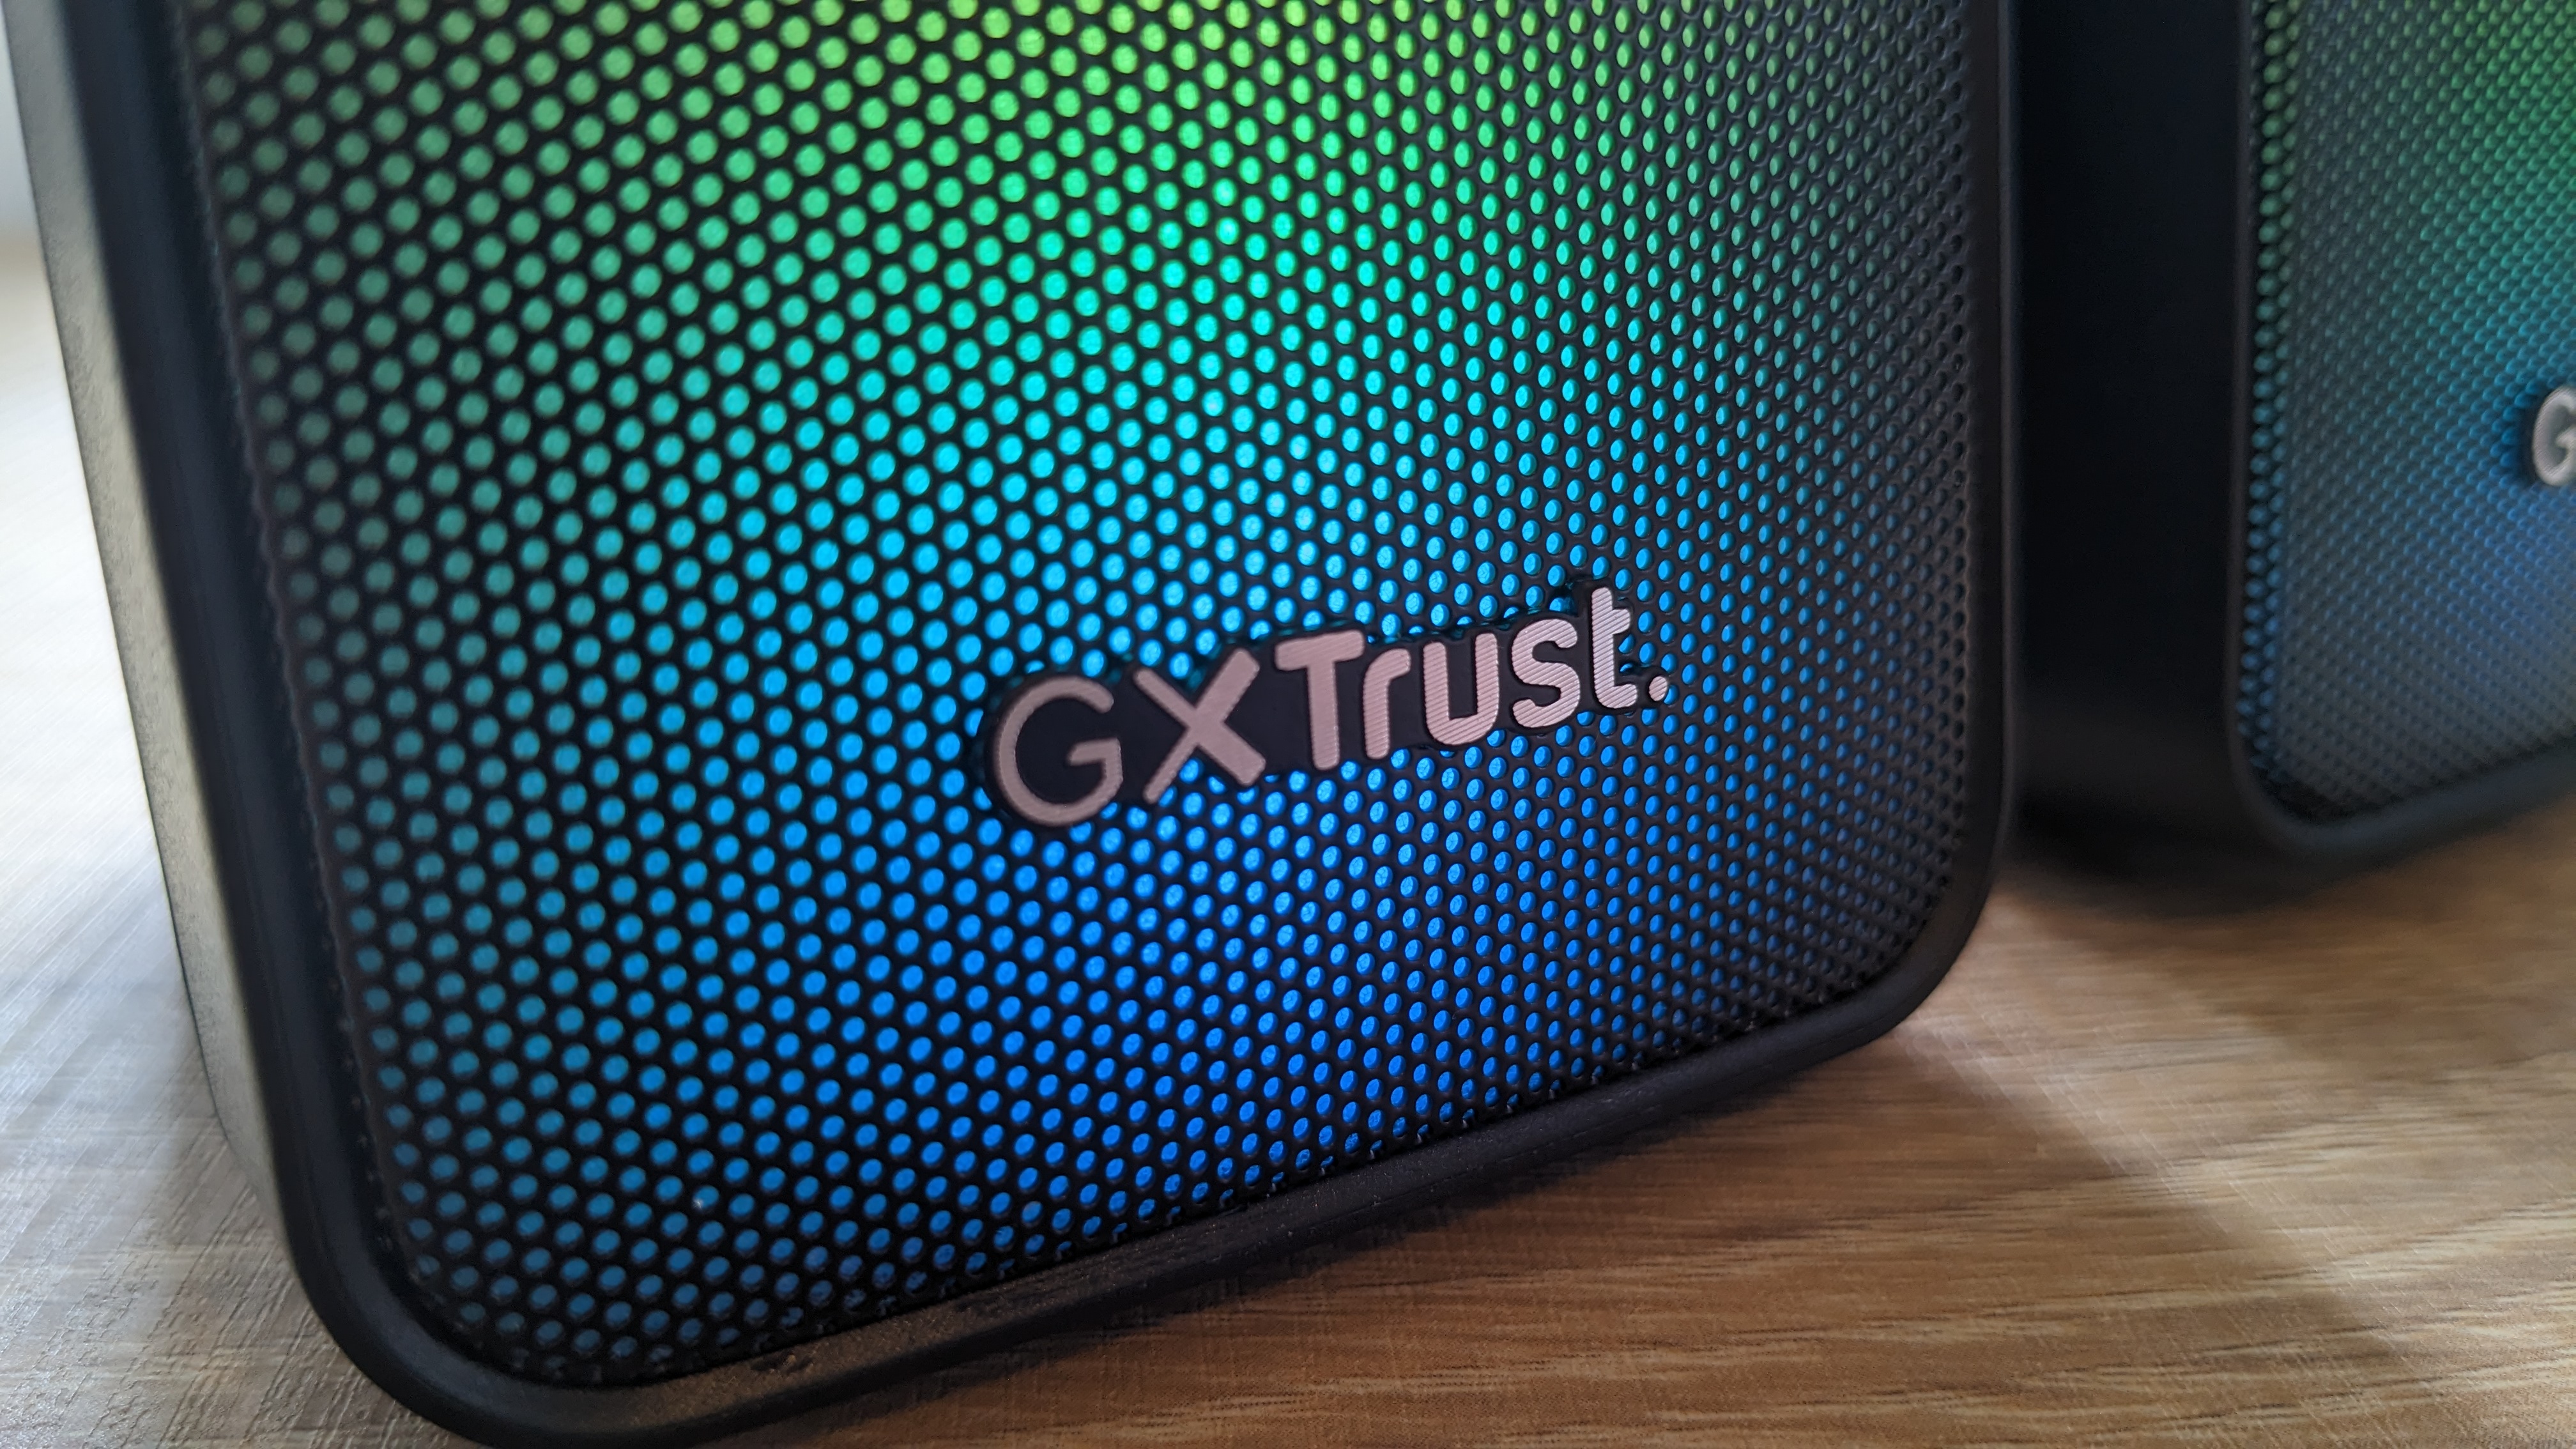 The Trust GXT 611 Wezz RGB speakers pictured on a wooden desk.